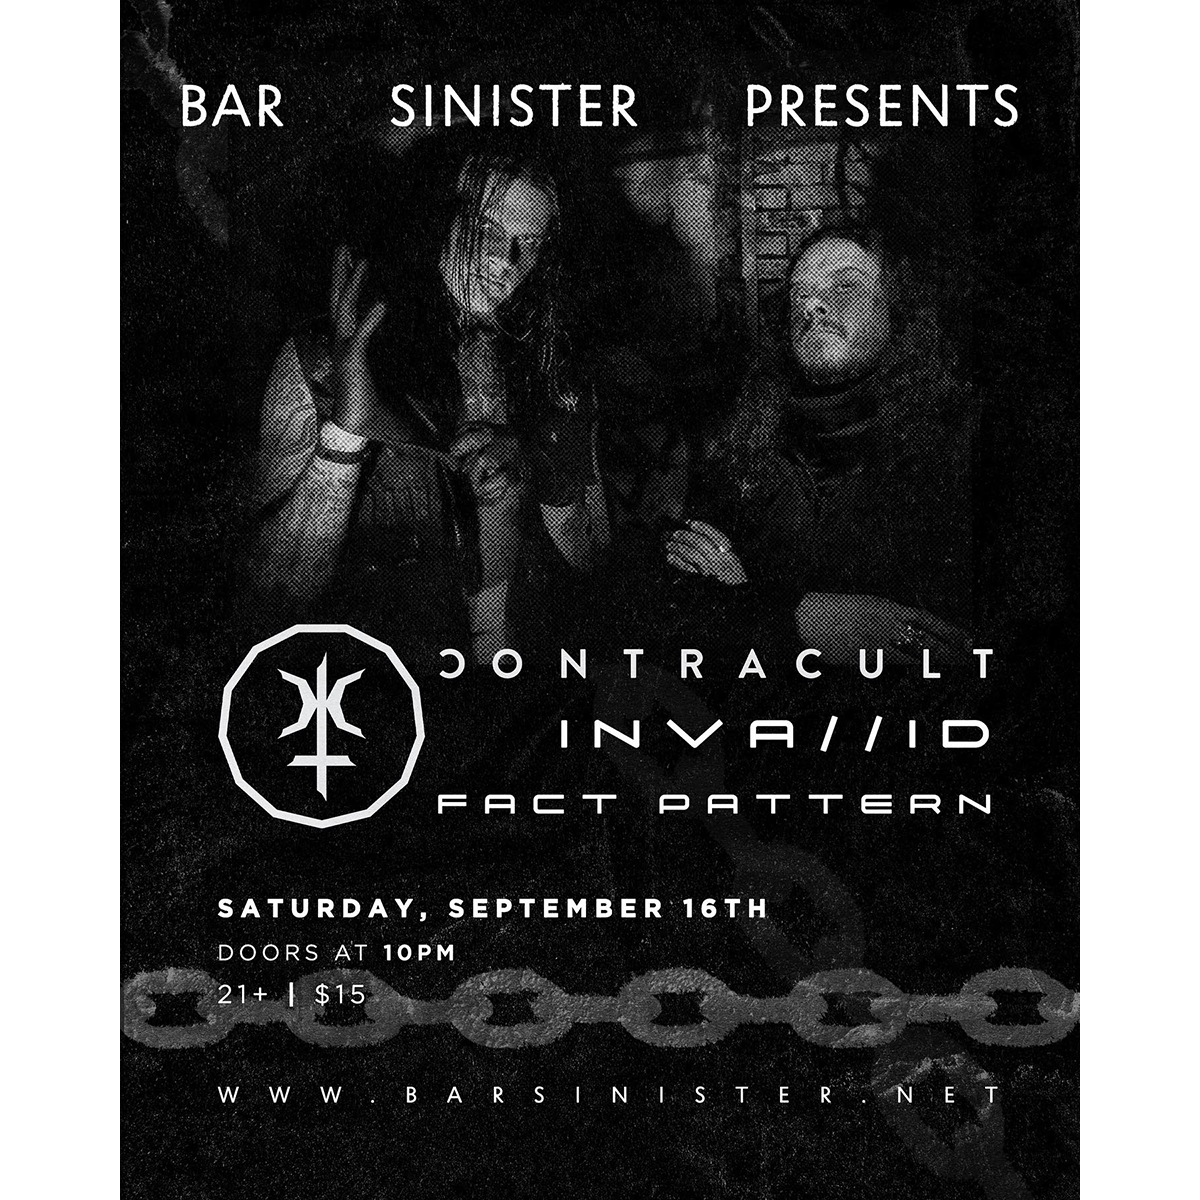 Contracult, Invalid, and Fact Pattern at Bar Sinister in Hollywood, CA